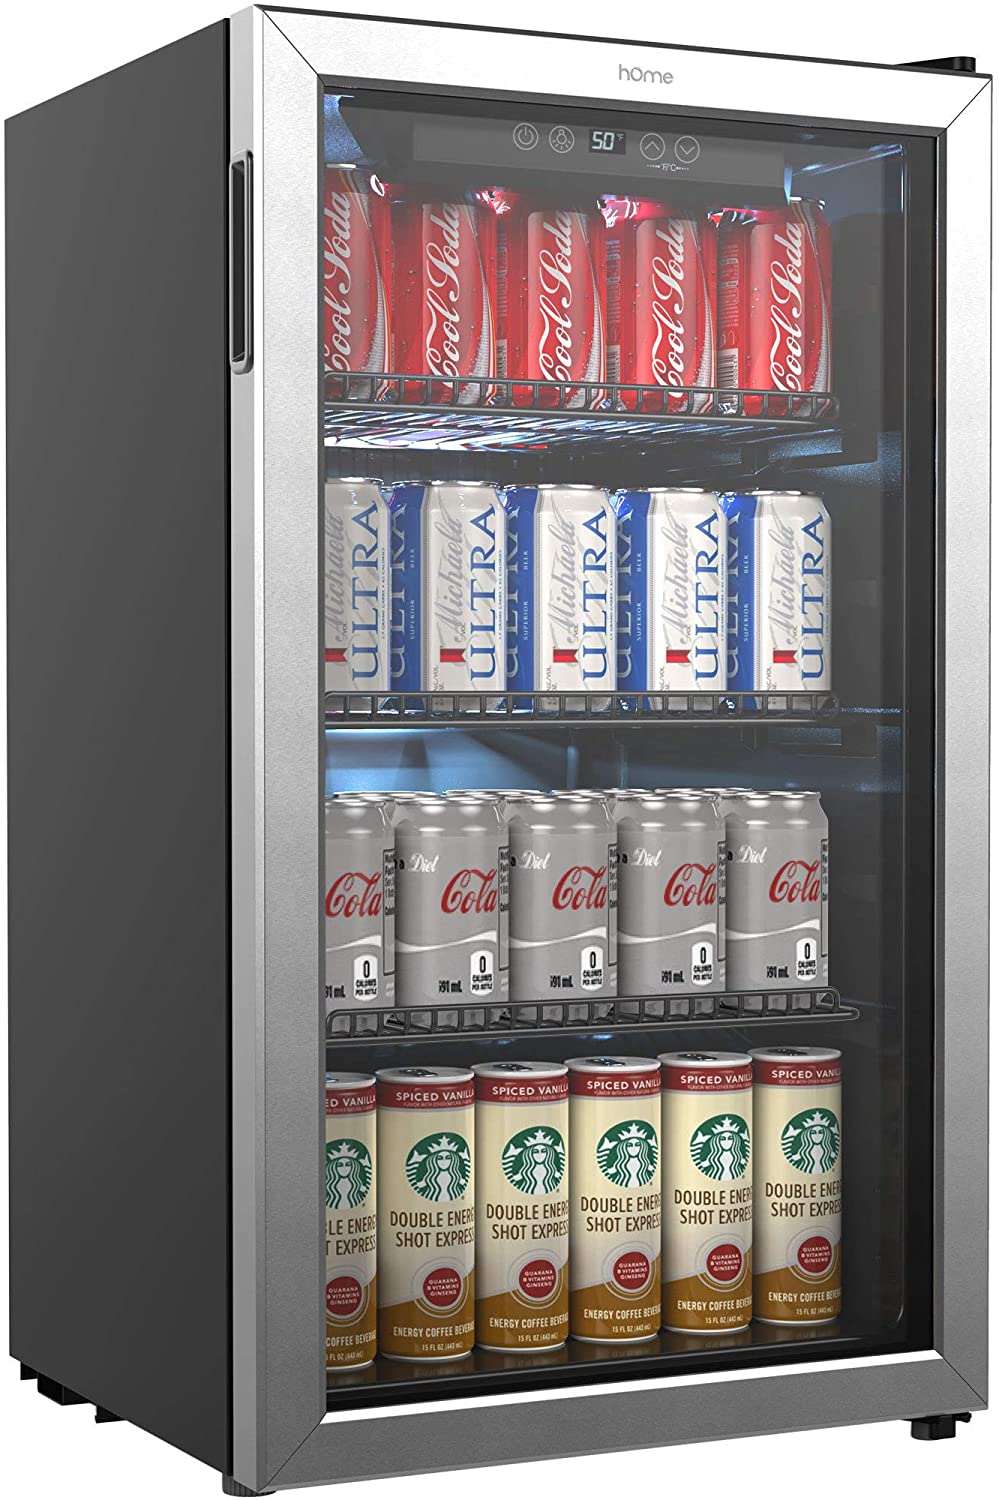 Review of hOmeLabs Beverage Refrigerator and Cooler - 120 Can Mini Fridge